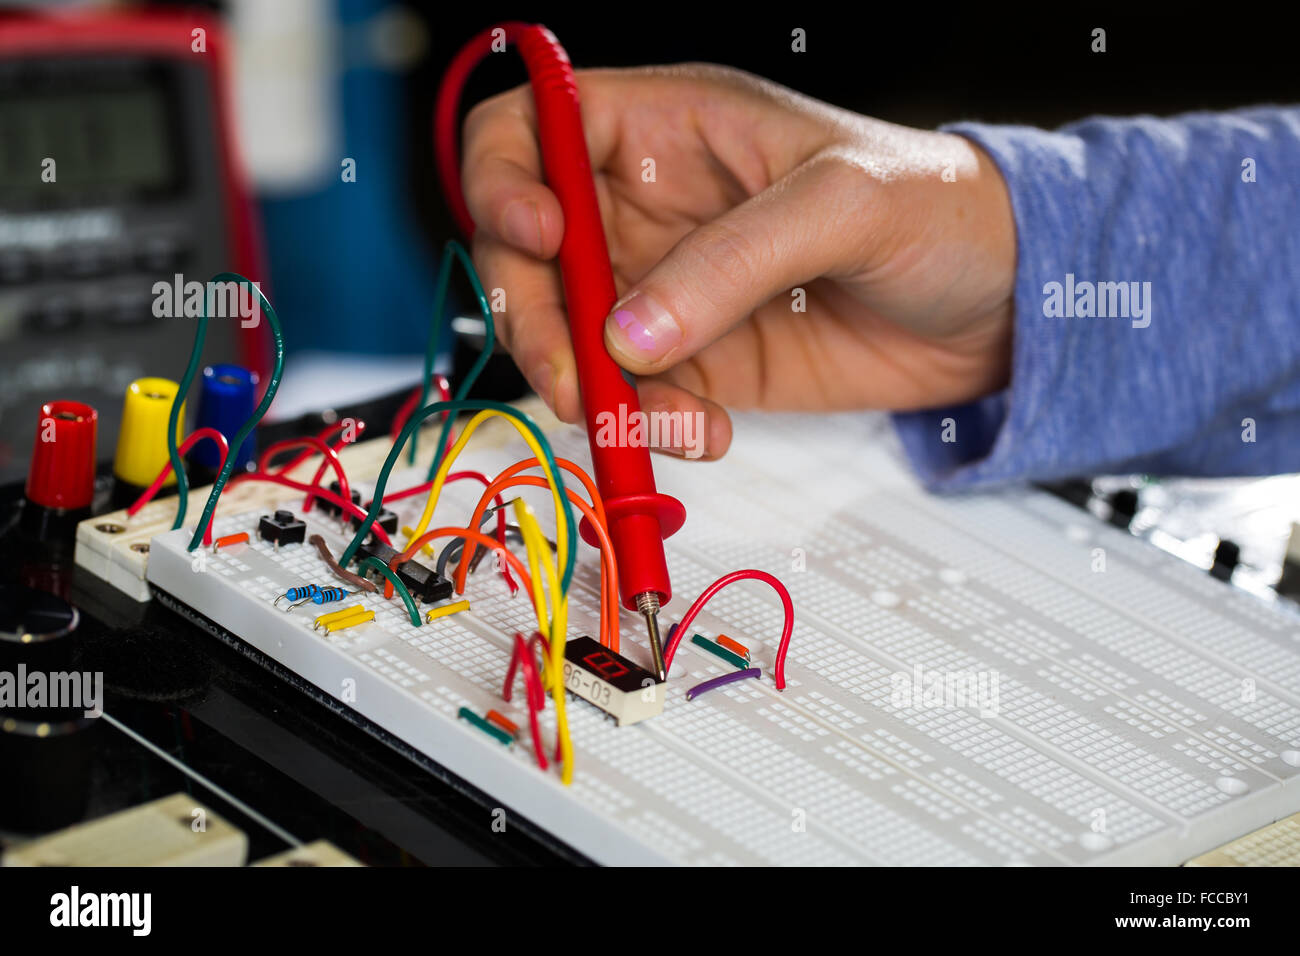 Information Technology. Wiring for servers and mainframes. Stock Photo